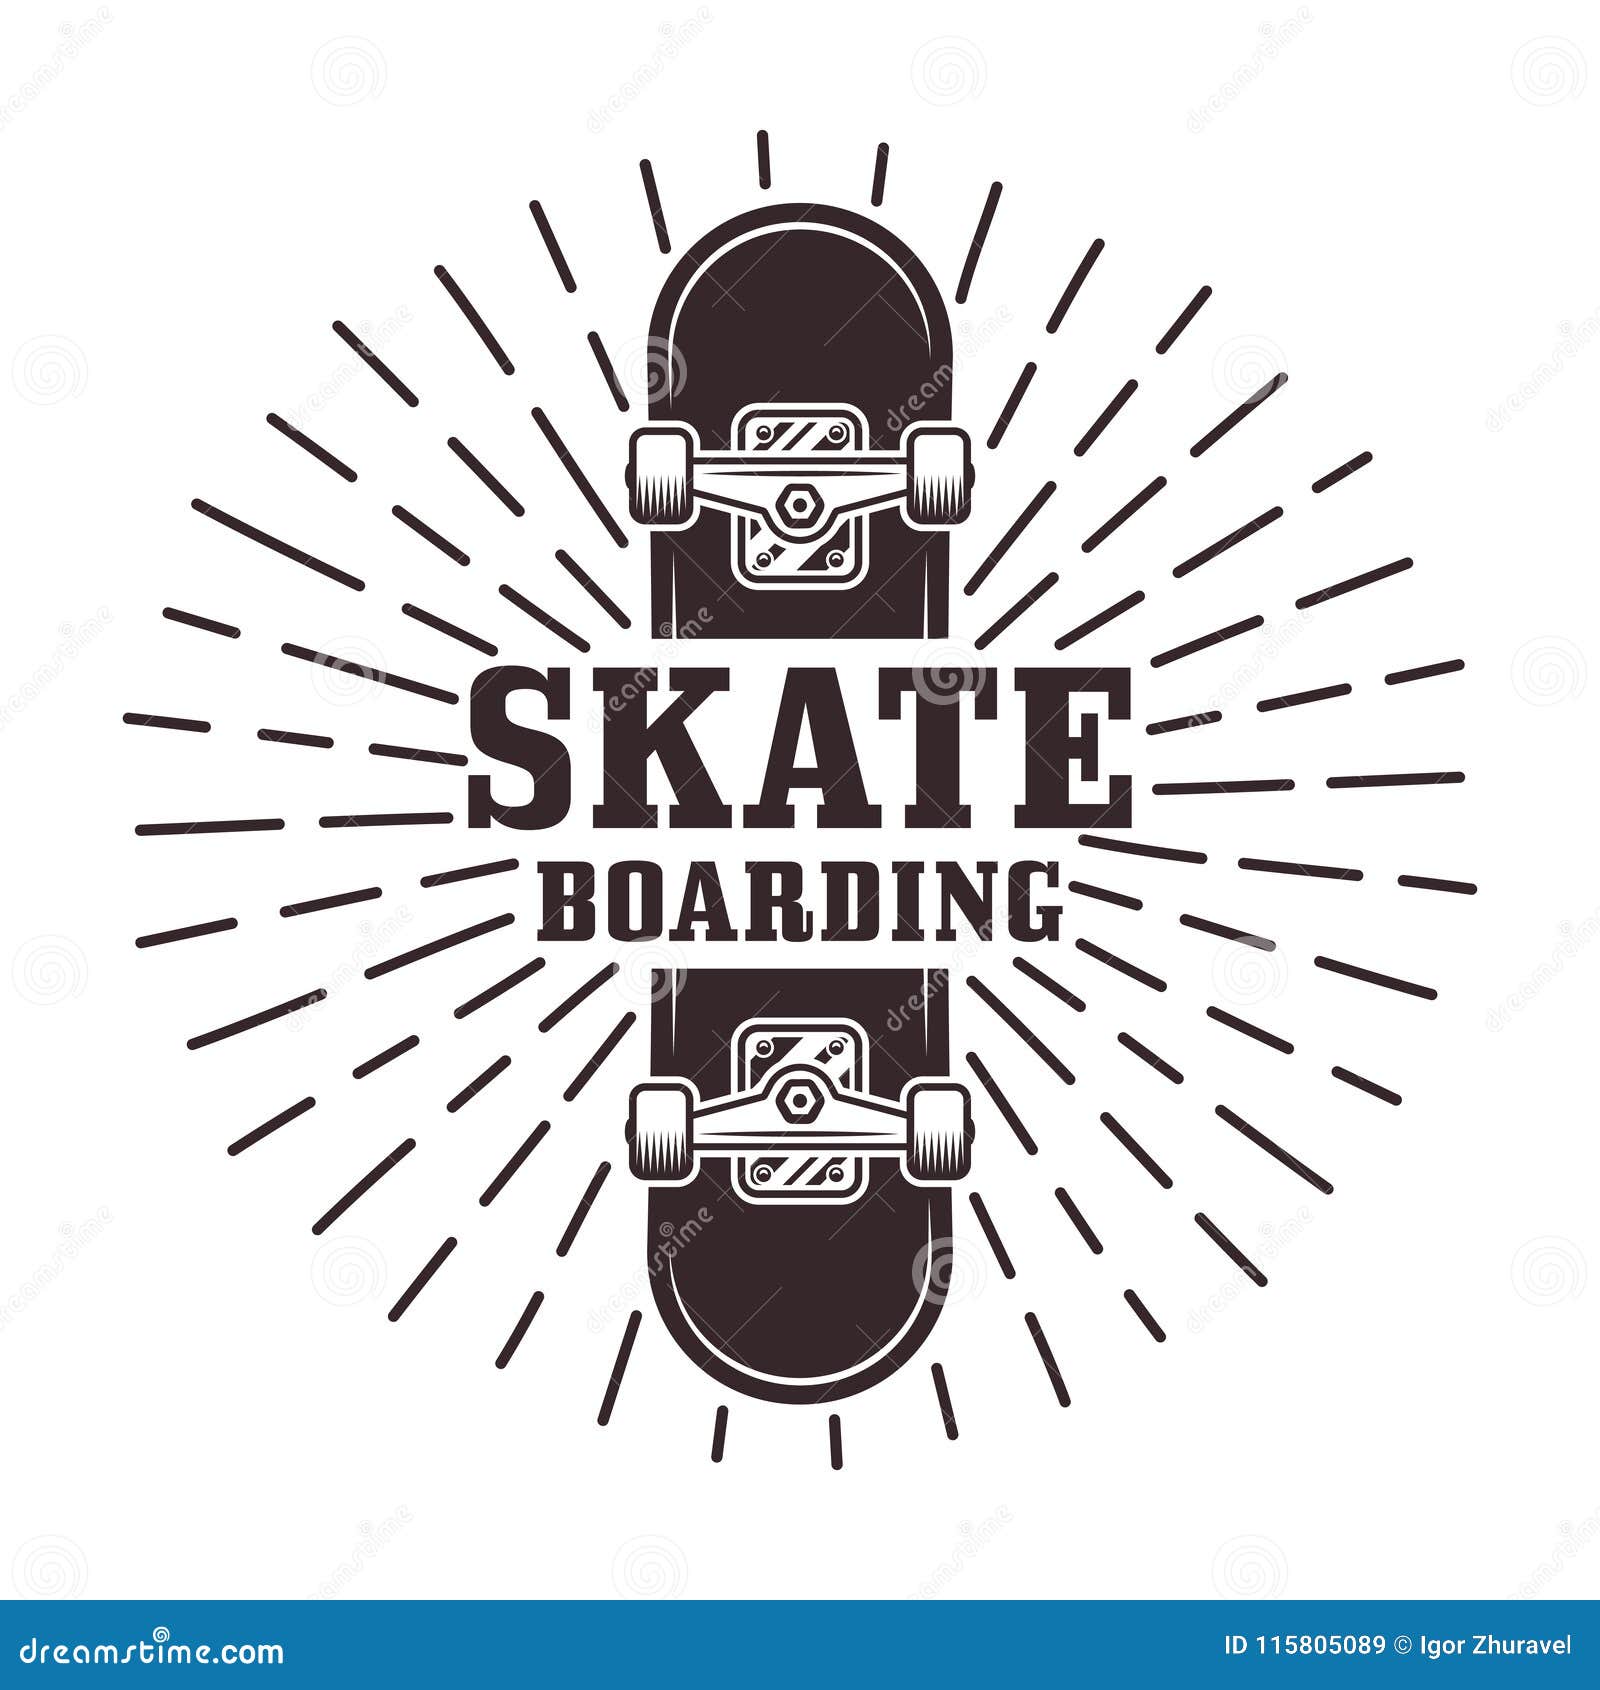 Skateboarding Vector Stamp or Label with Rays Stock Vector ...